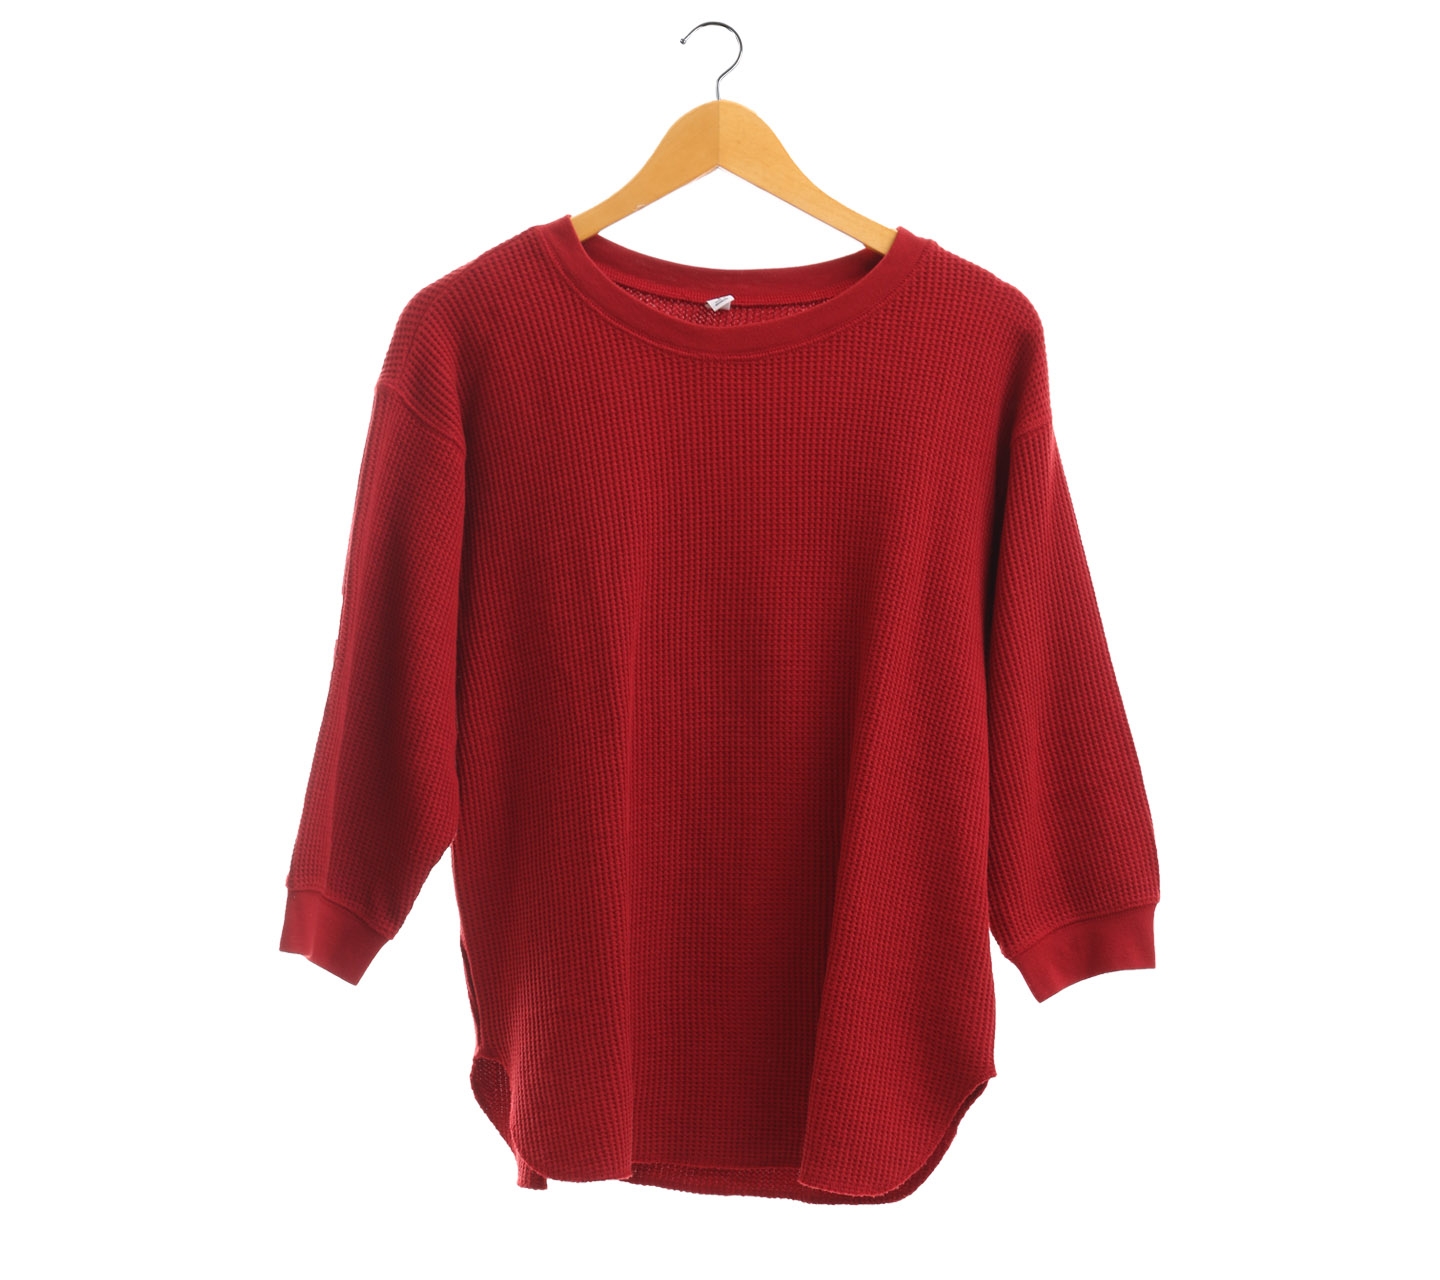 Uniqlo Red Knit Blouse